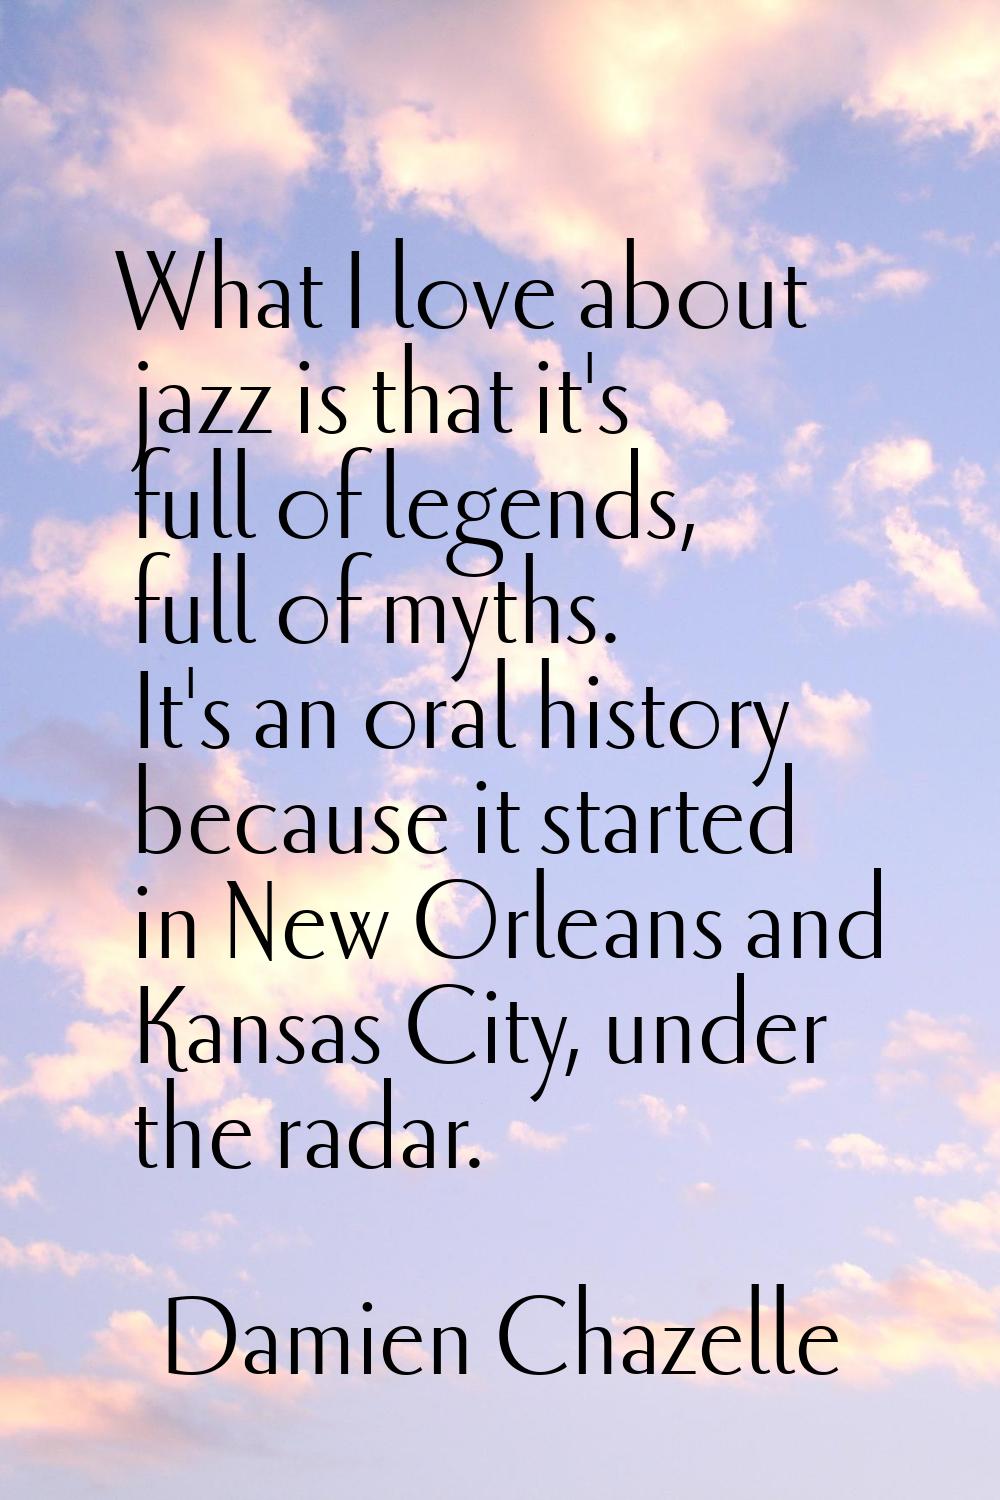 What I love about jazz is that it's full of legends, full of myths. It's an oral history because it